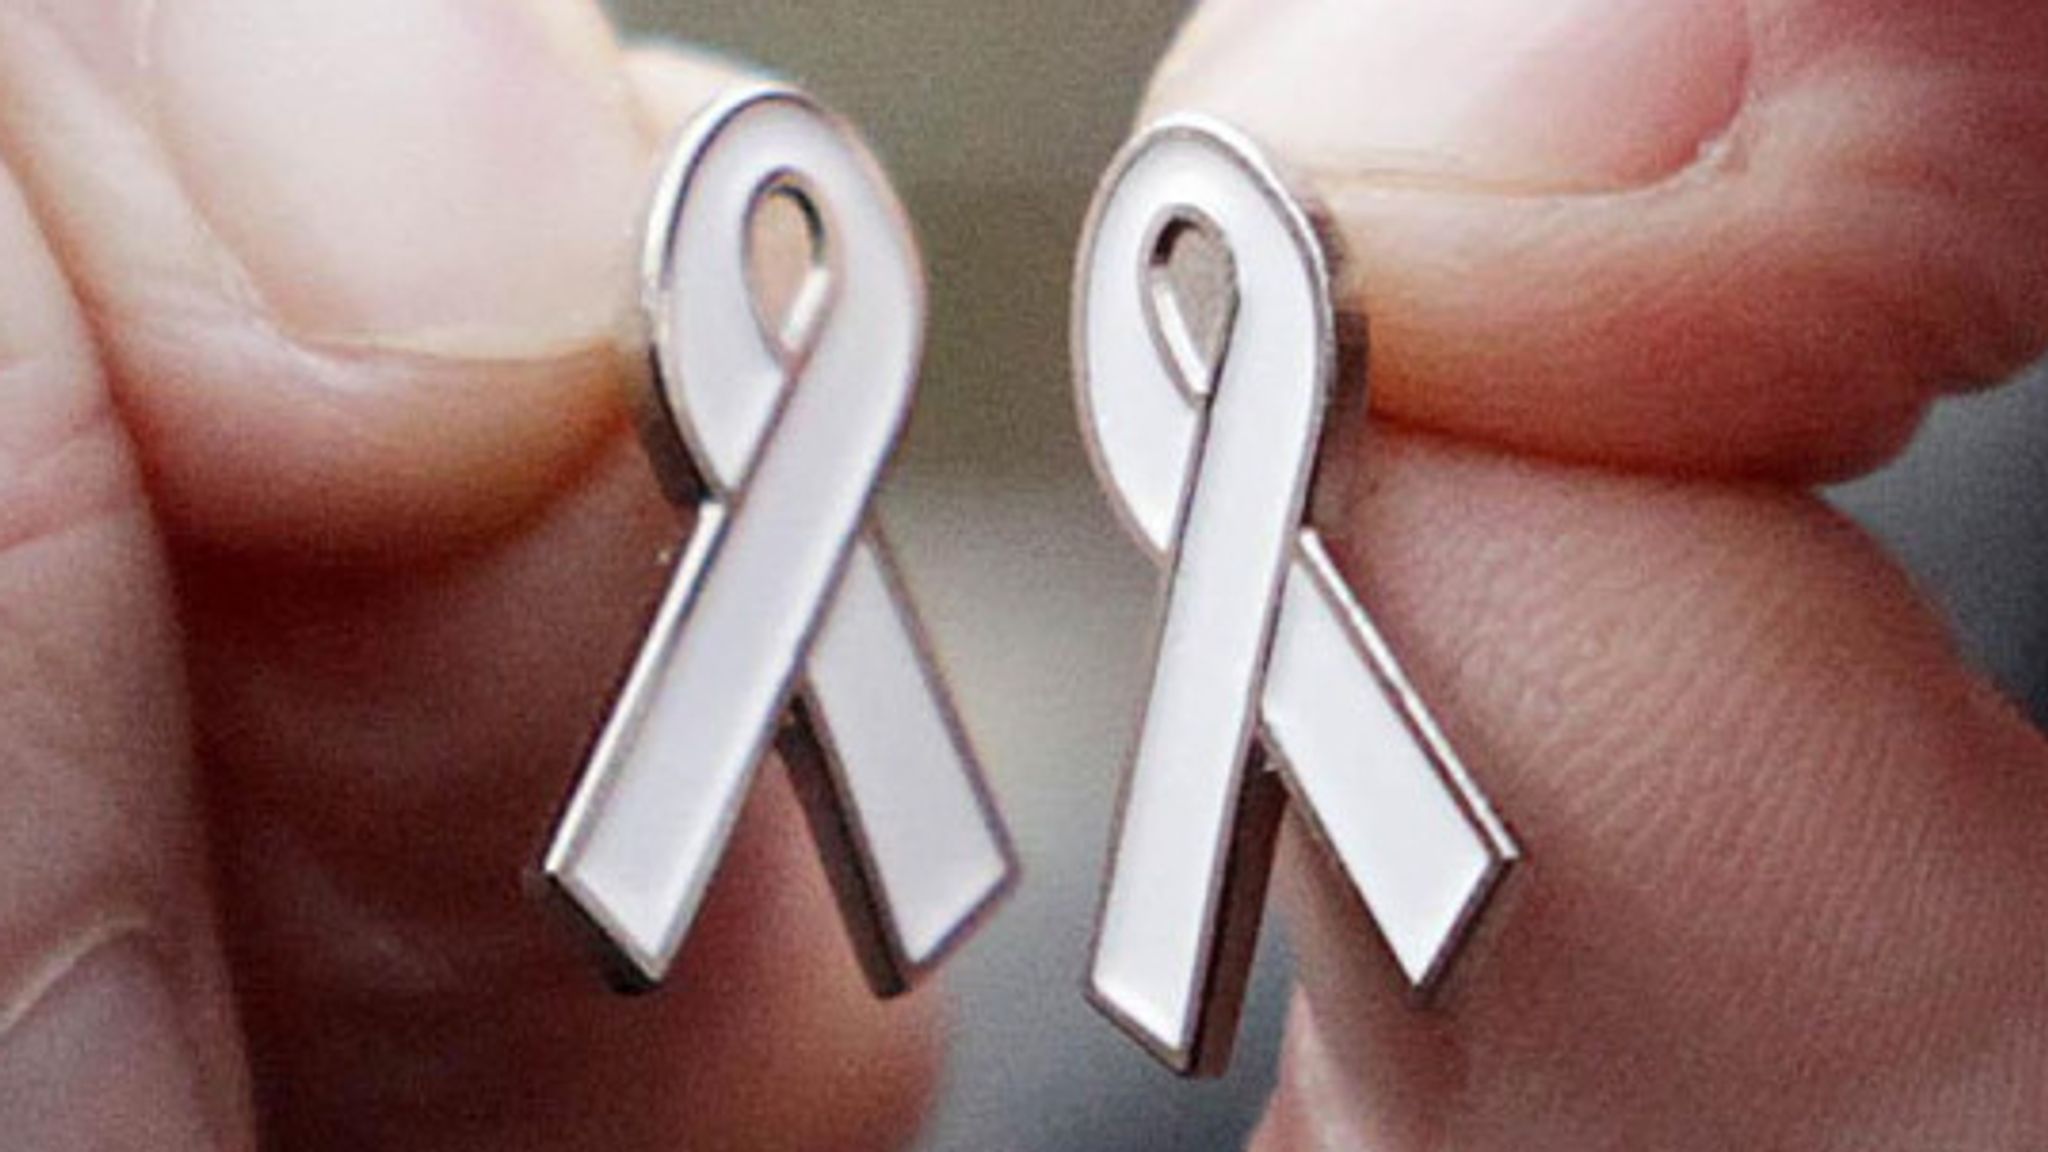 White Ribbon Campaign Creates Awareness of Violence Against Women